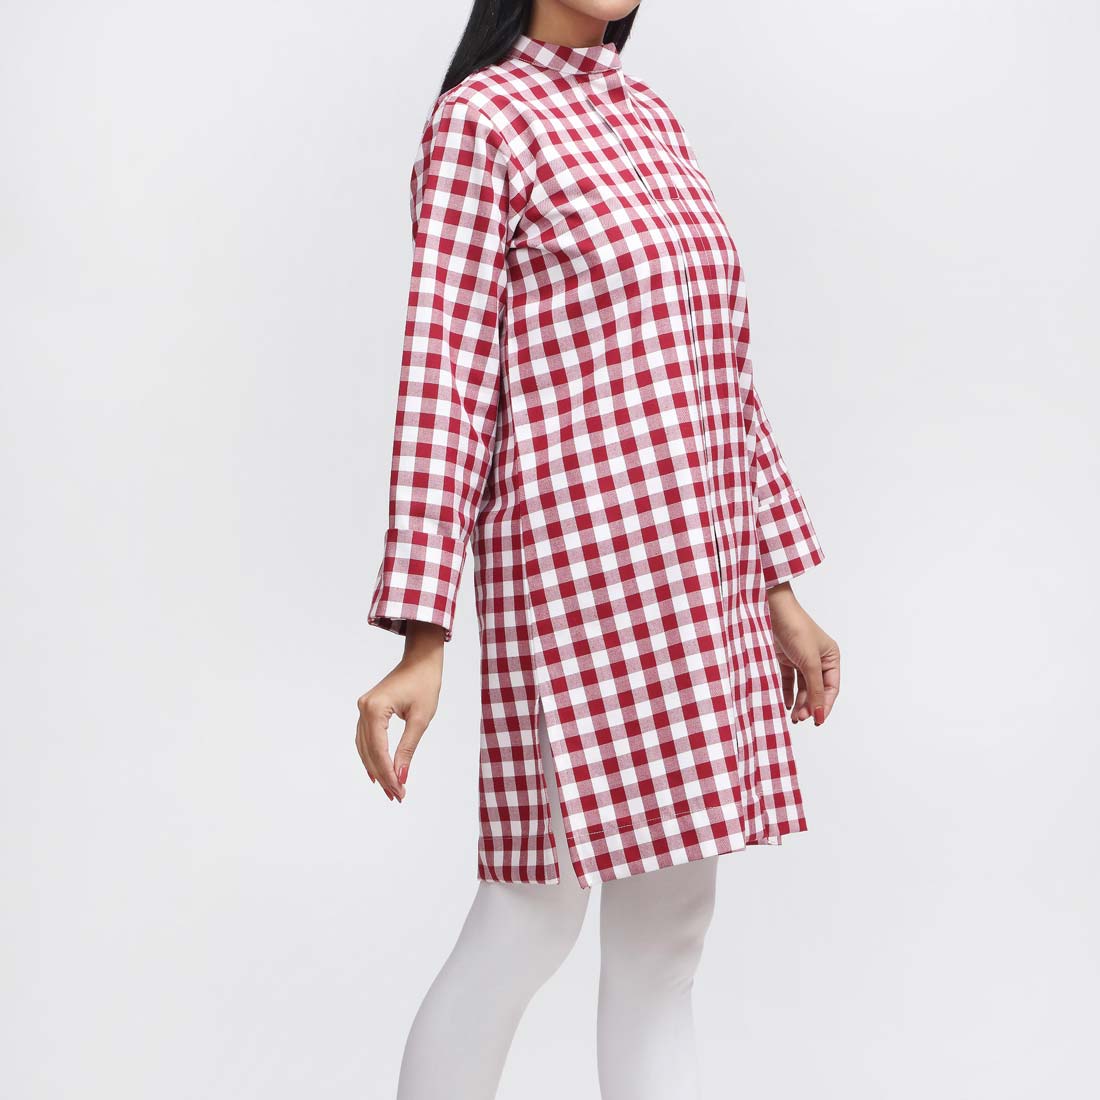 1PC- Flannel Checkered Shirt PW9141